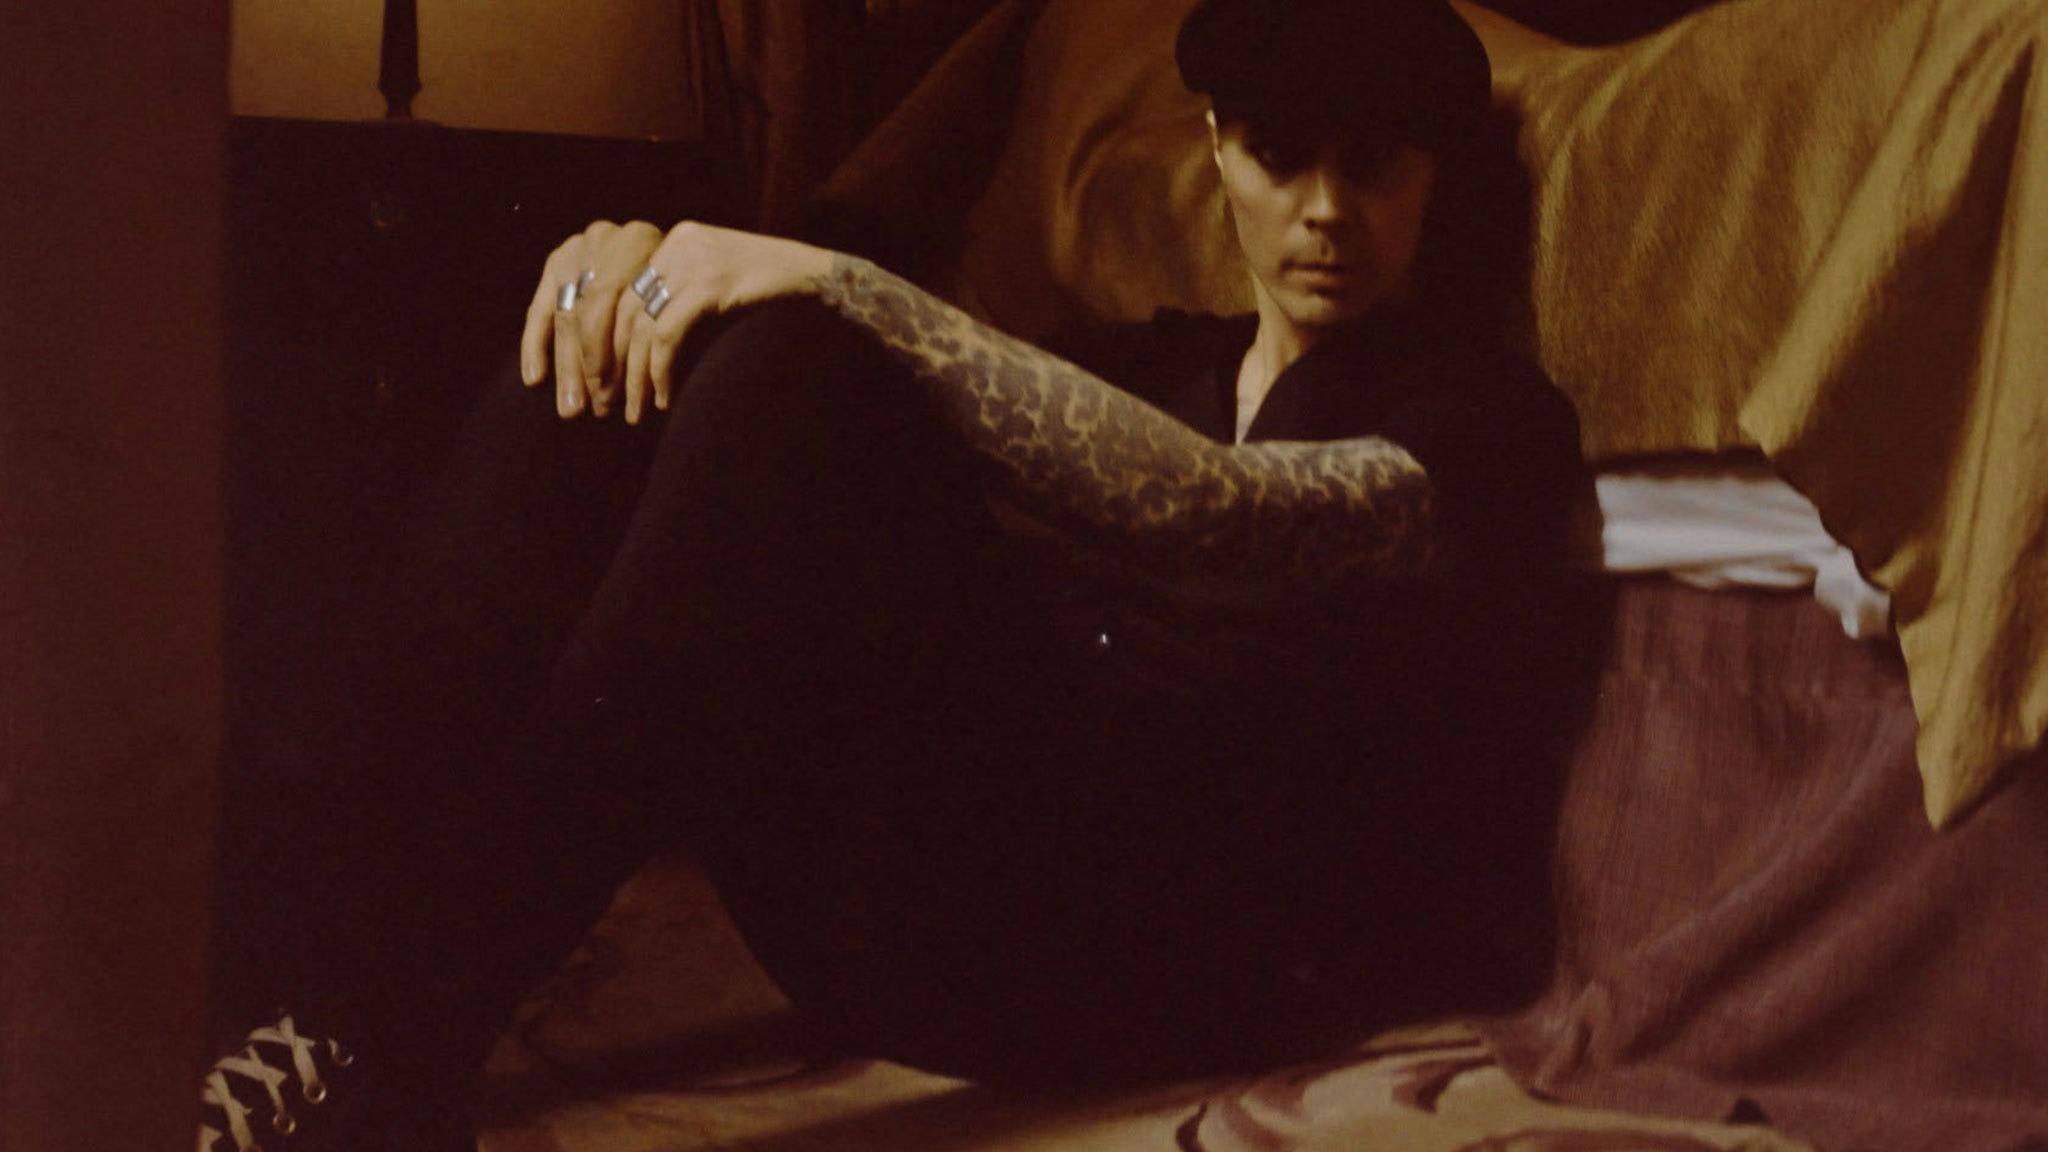 The rise of Ville Valo, as told through HIM’s most important gigs